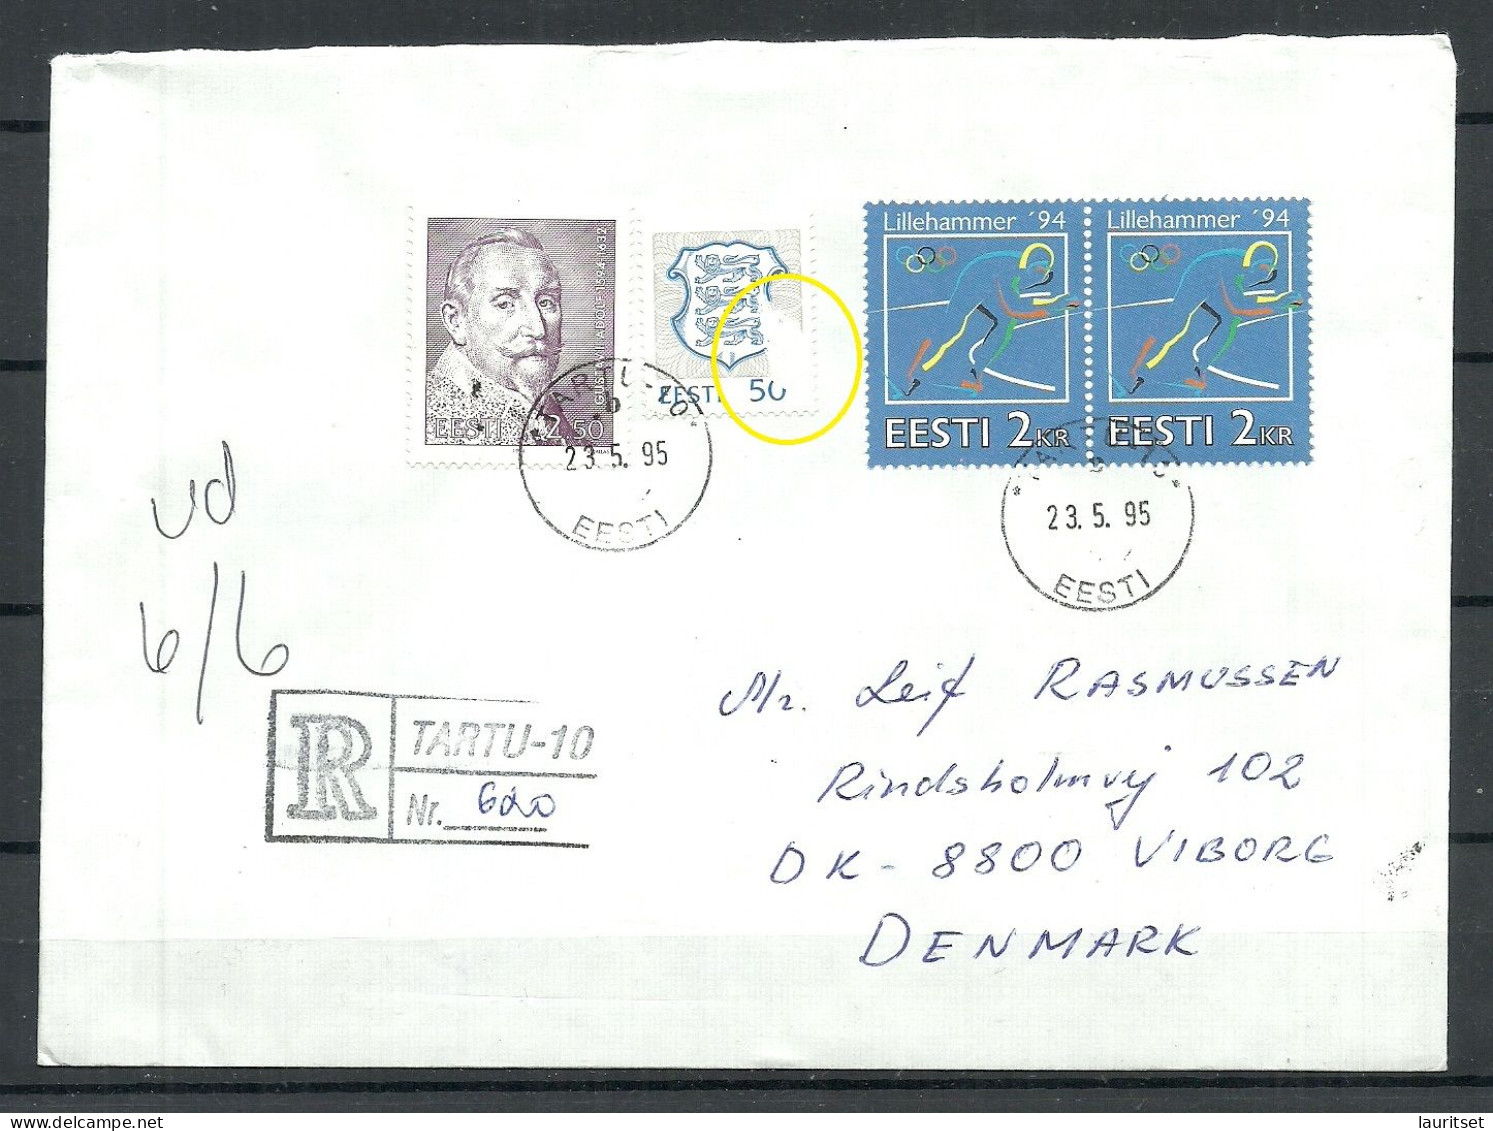 ESTLAND Estonia 1995 Registered Cover To Denmark Olympic Games Lillehammer Etc. NB! Coat Of Arms Stamp Is Damaged! - Winter 1994: Lillehammer